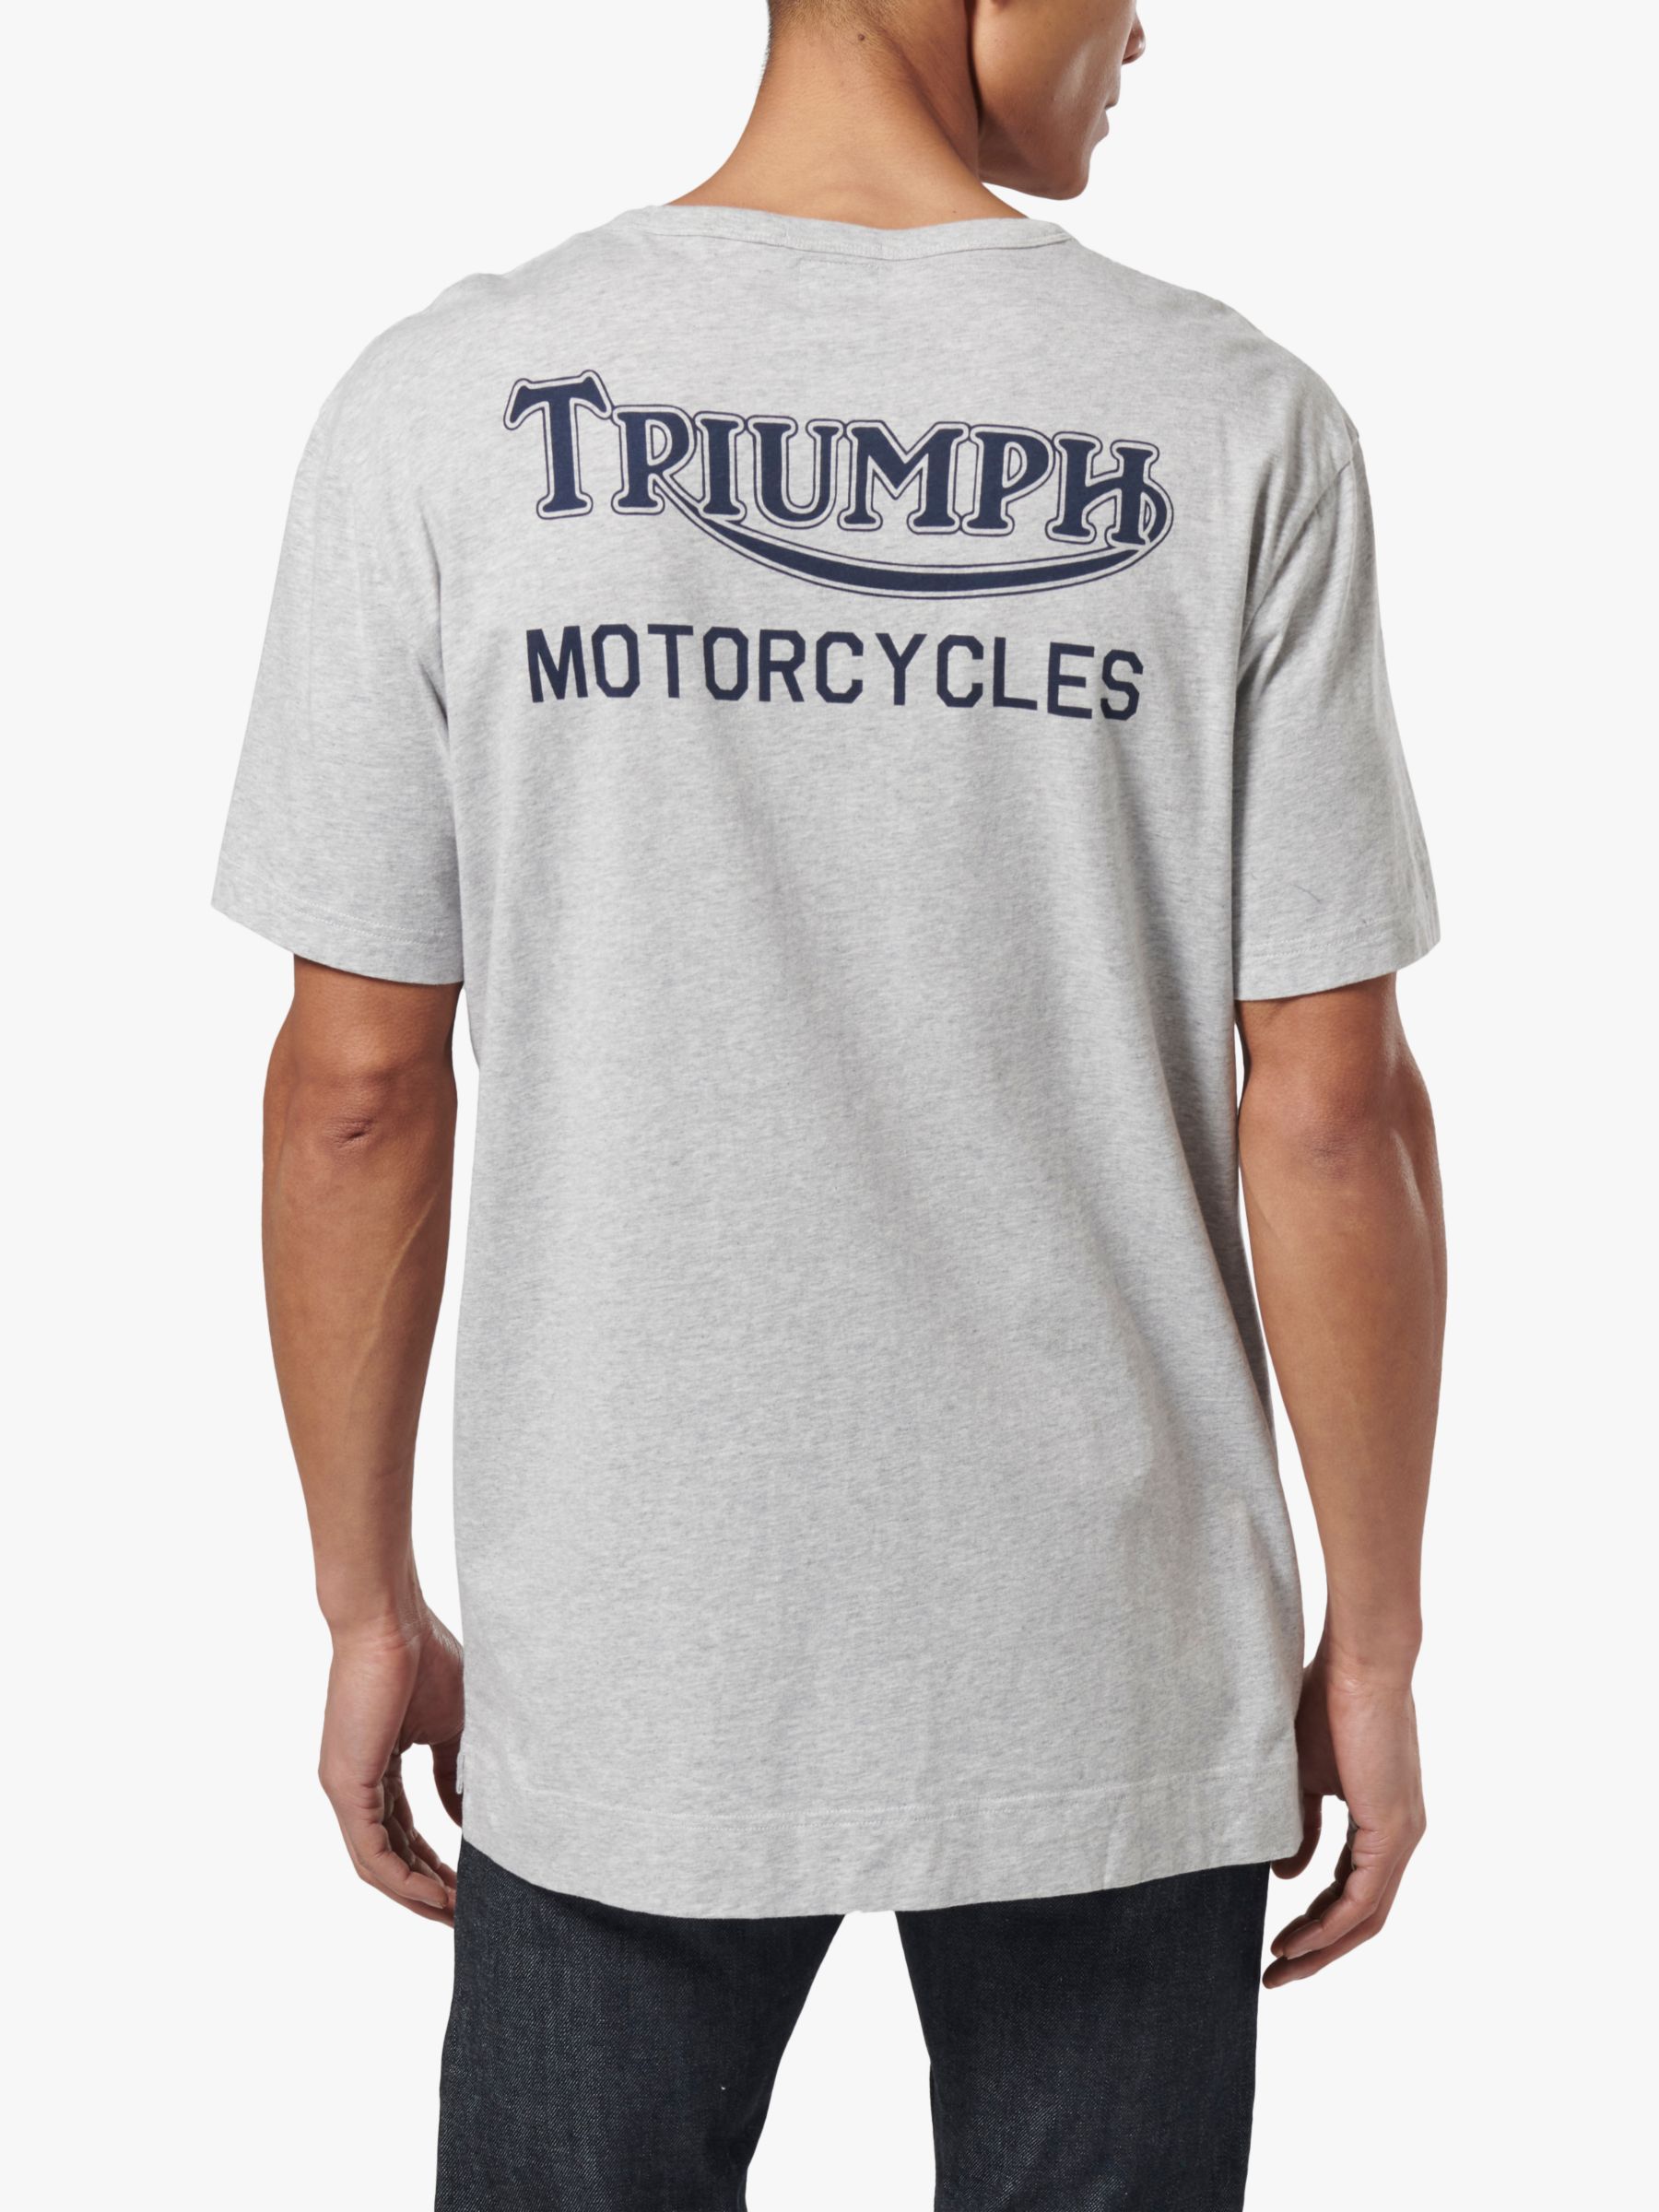 Triumph Motorcycles Adcote T-Shirt, Silver Marl, S